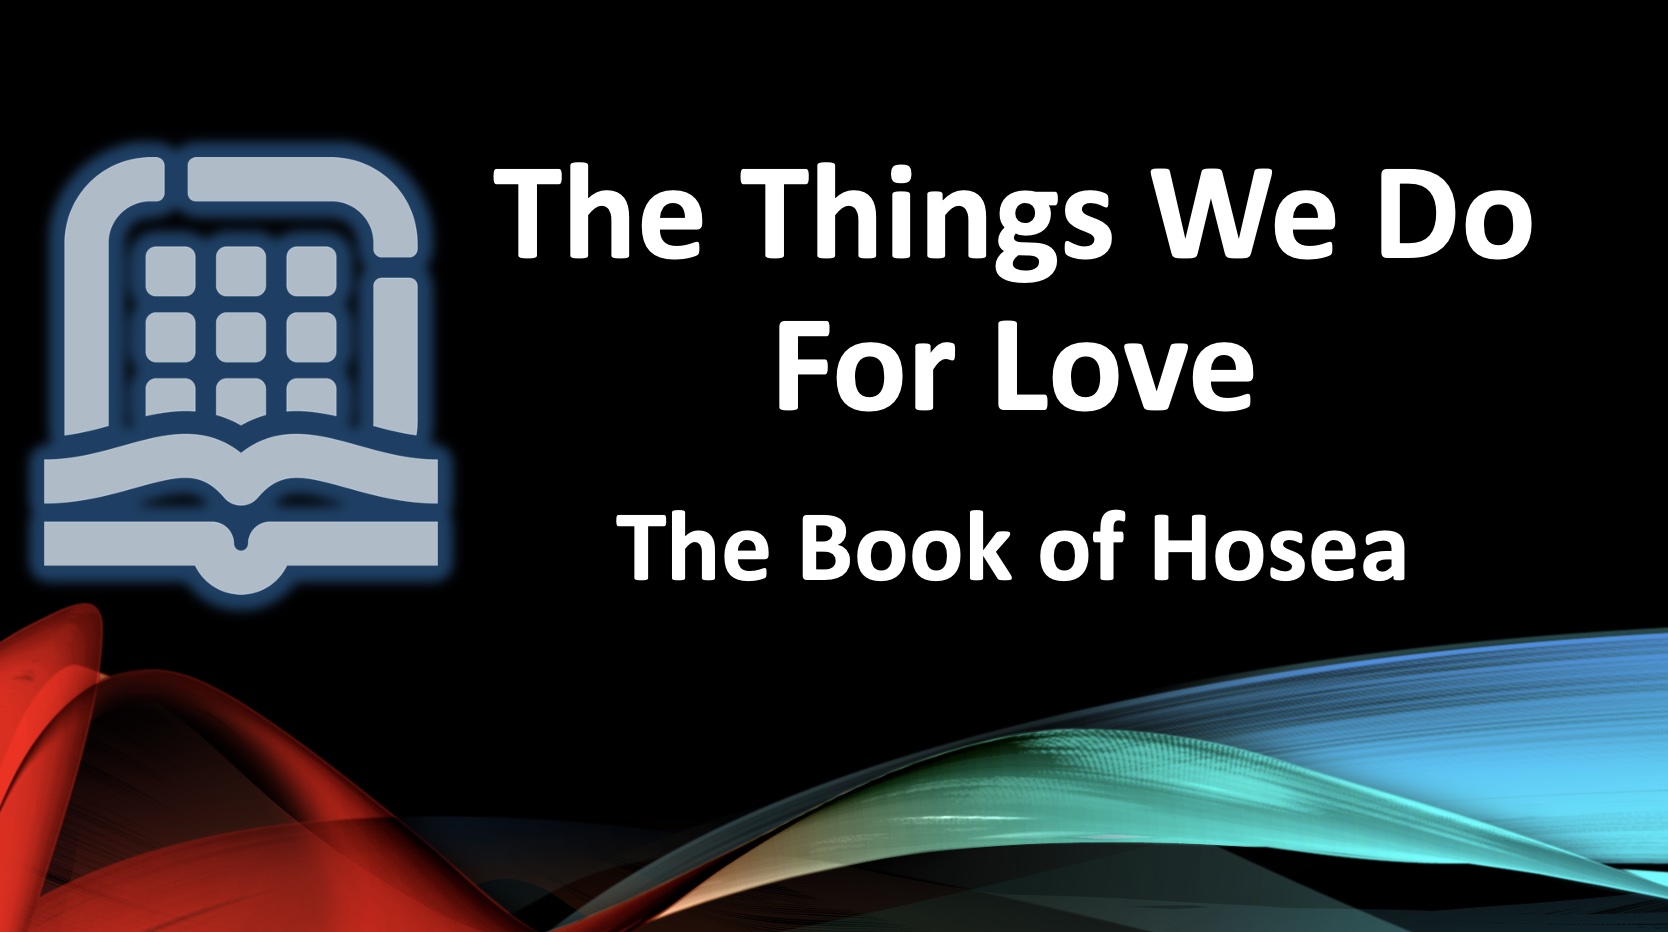 The Things We Do For Love (Hosea)